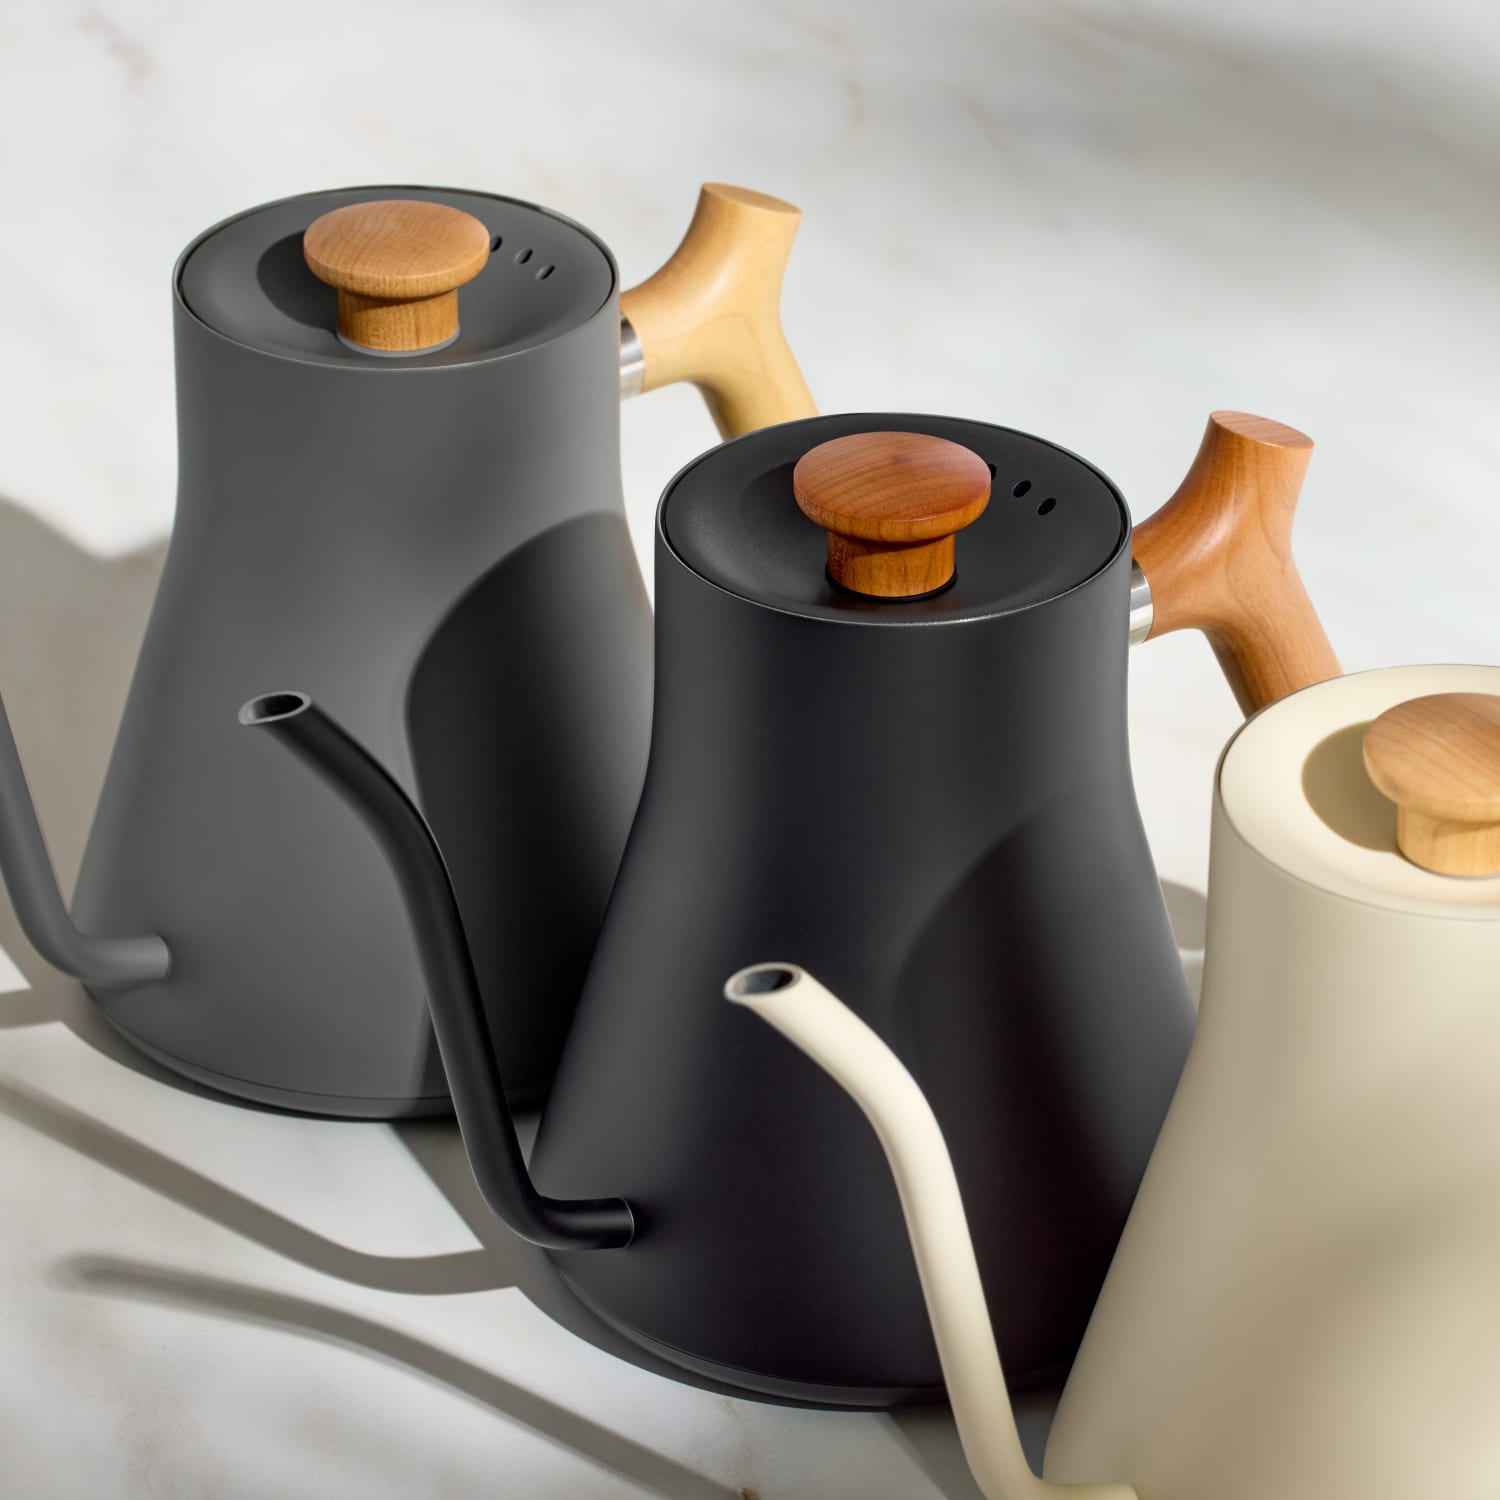 The Fellow Stagg Electric Kettle Comes in New Neutral Colors